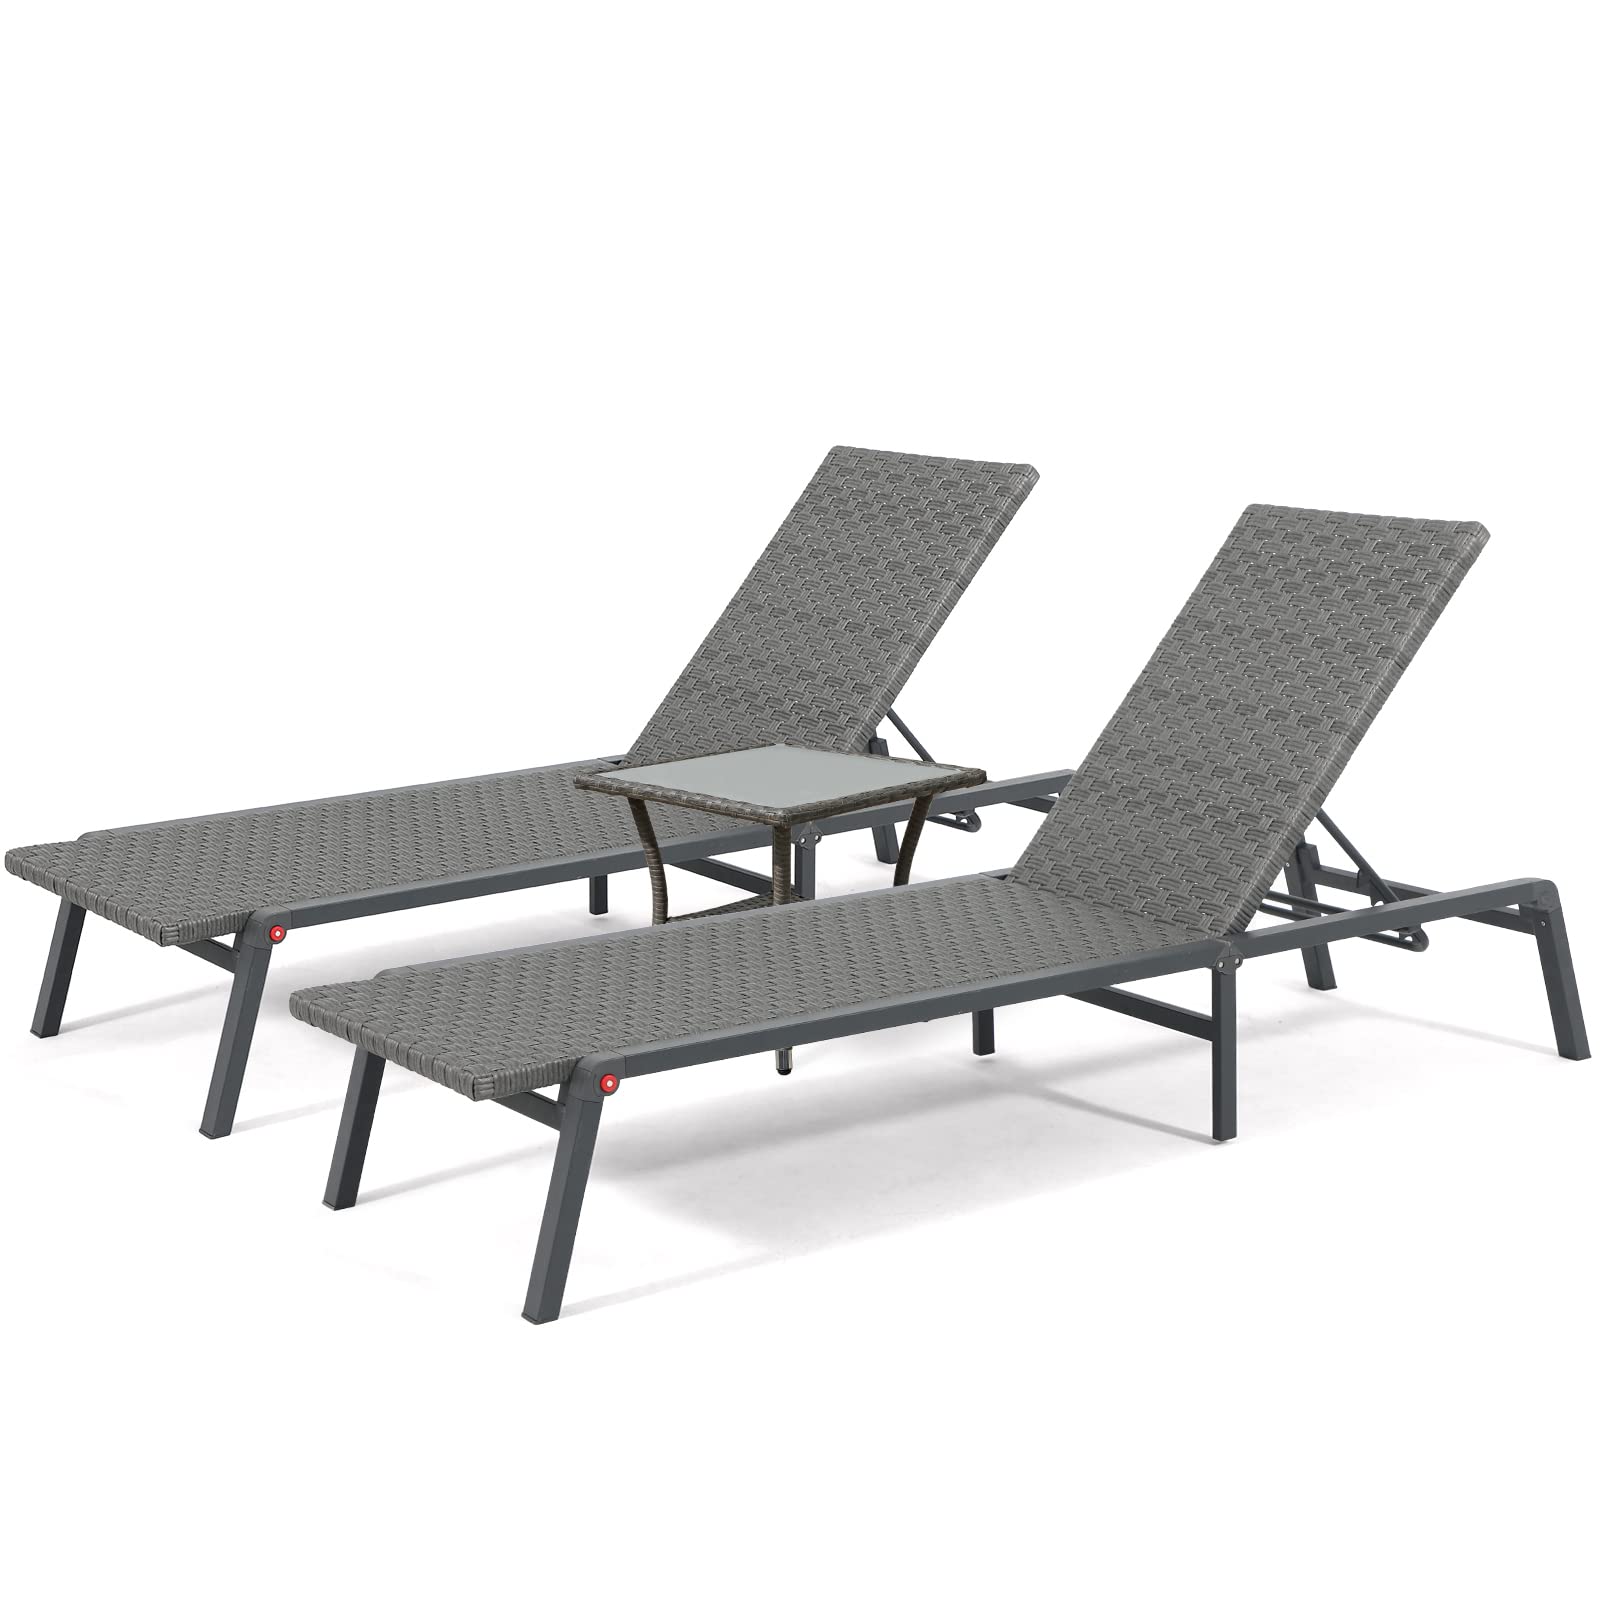 3 Pieces Outdoor Chaise Lounge Chair Set with Square Side Table, Adjustable 5-Position Folding Pool Lounge Chair, Patio Lounge Chair Set of 2 with Aluminum Frame, Grey - image 4 of 7